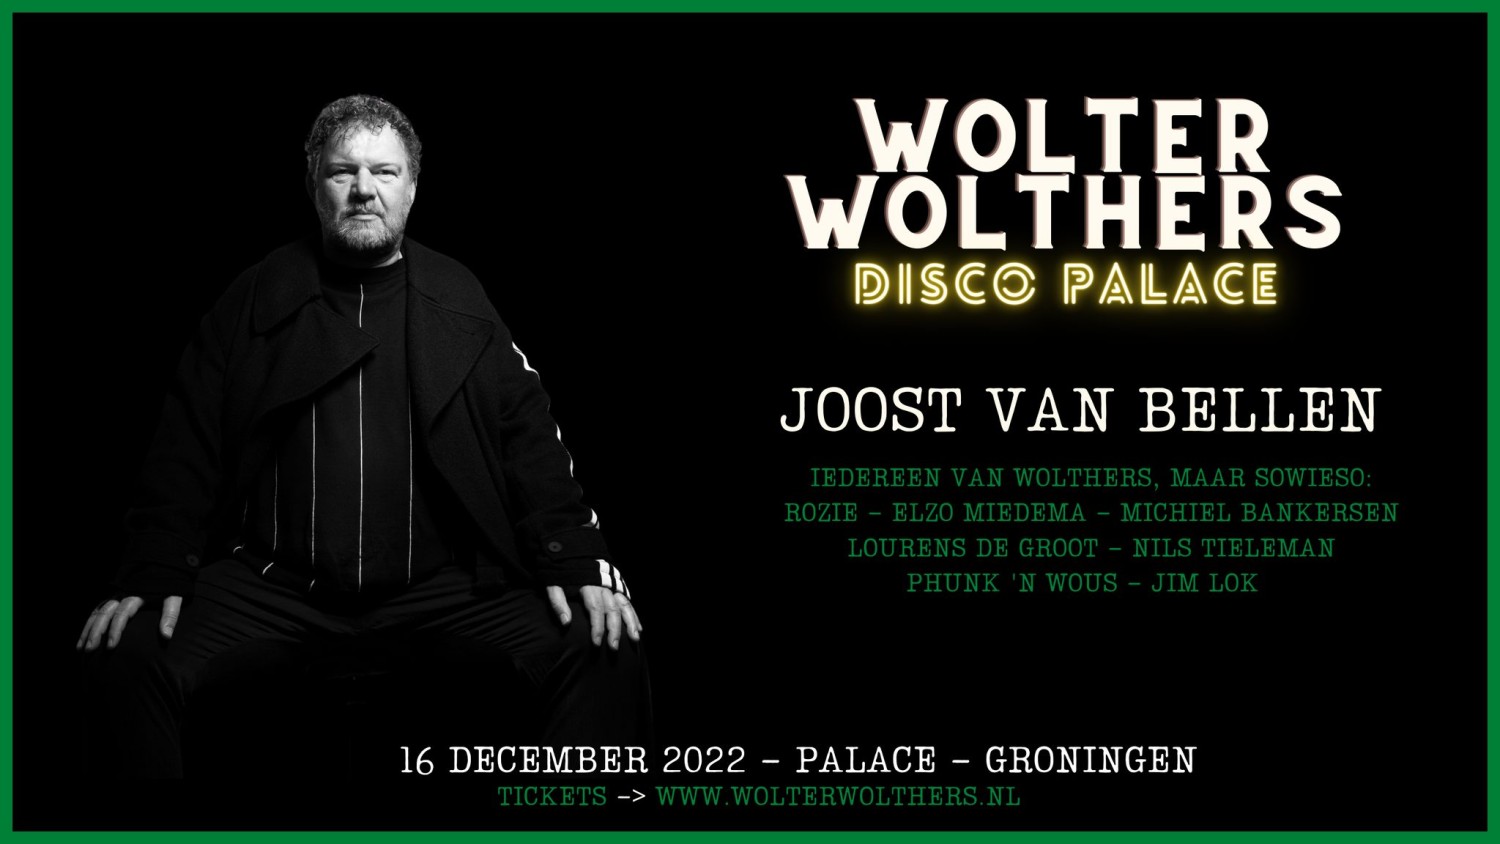 Wolter Wolthers Disco Palace